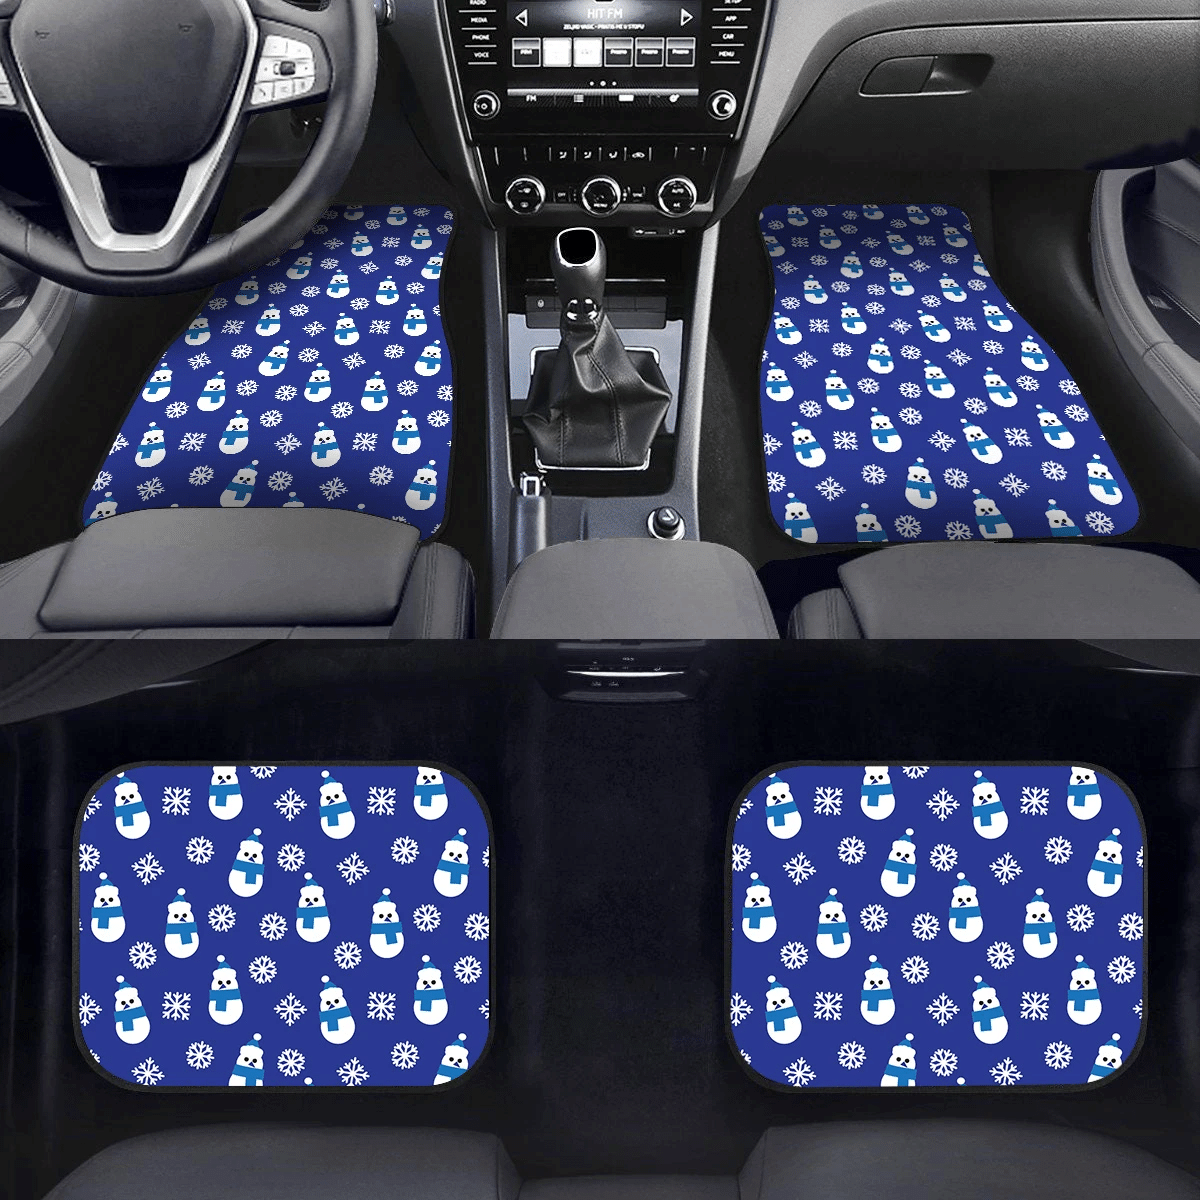 Blue And White Chistmas Pattern With Snowman And Snowflakes Car Mats Car Floor Mats